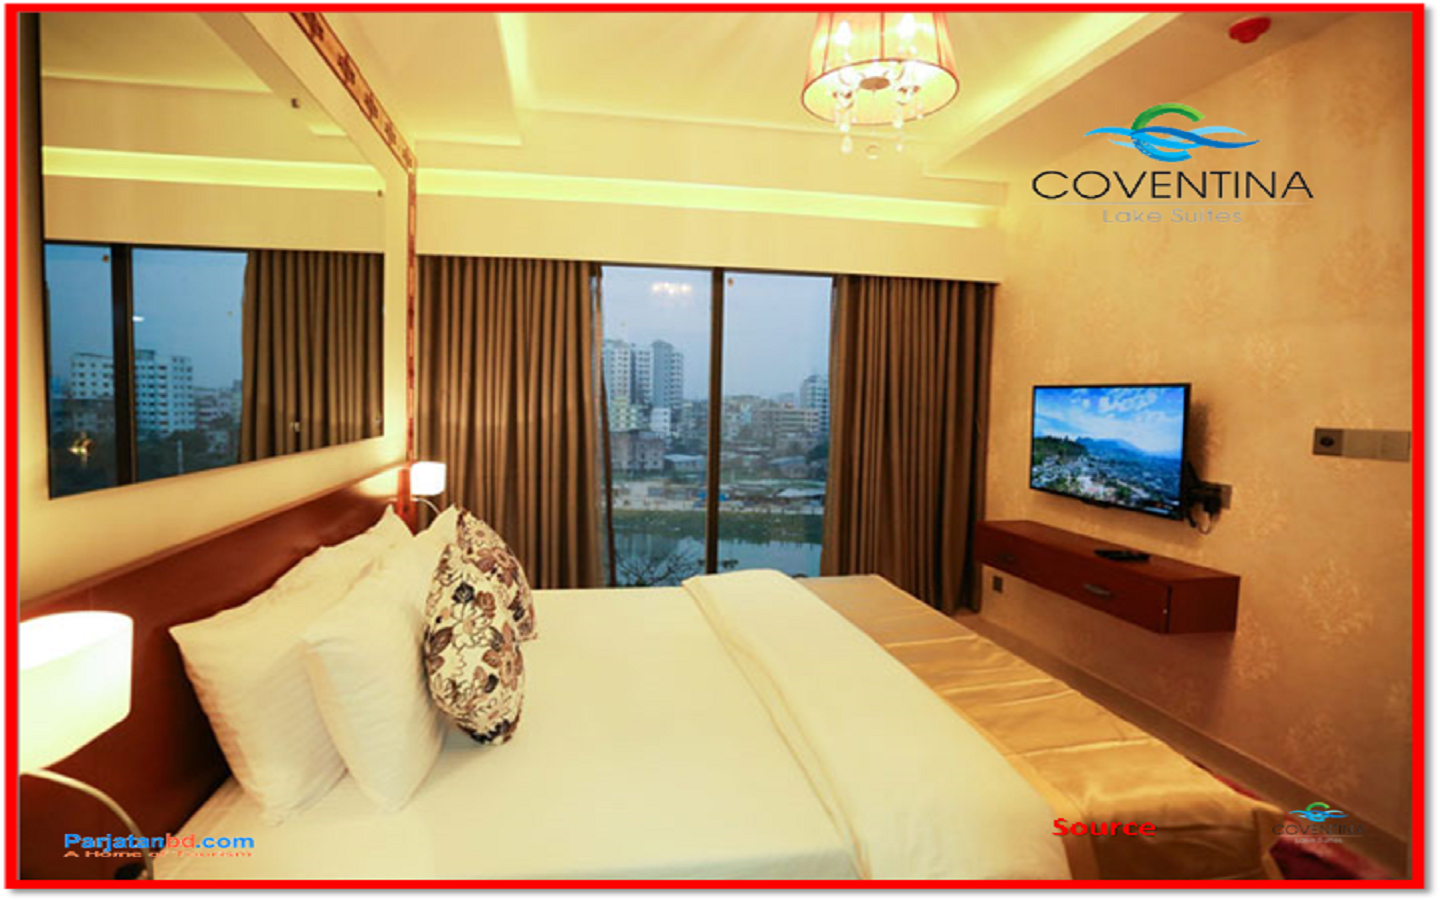 Room Crown Suites -1, Coventina Lake Suites- Serviced Apartments, Banani